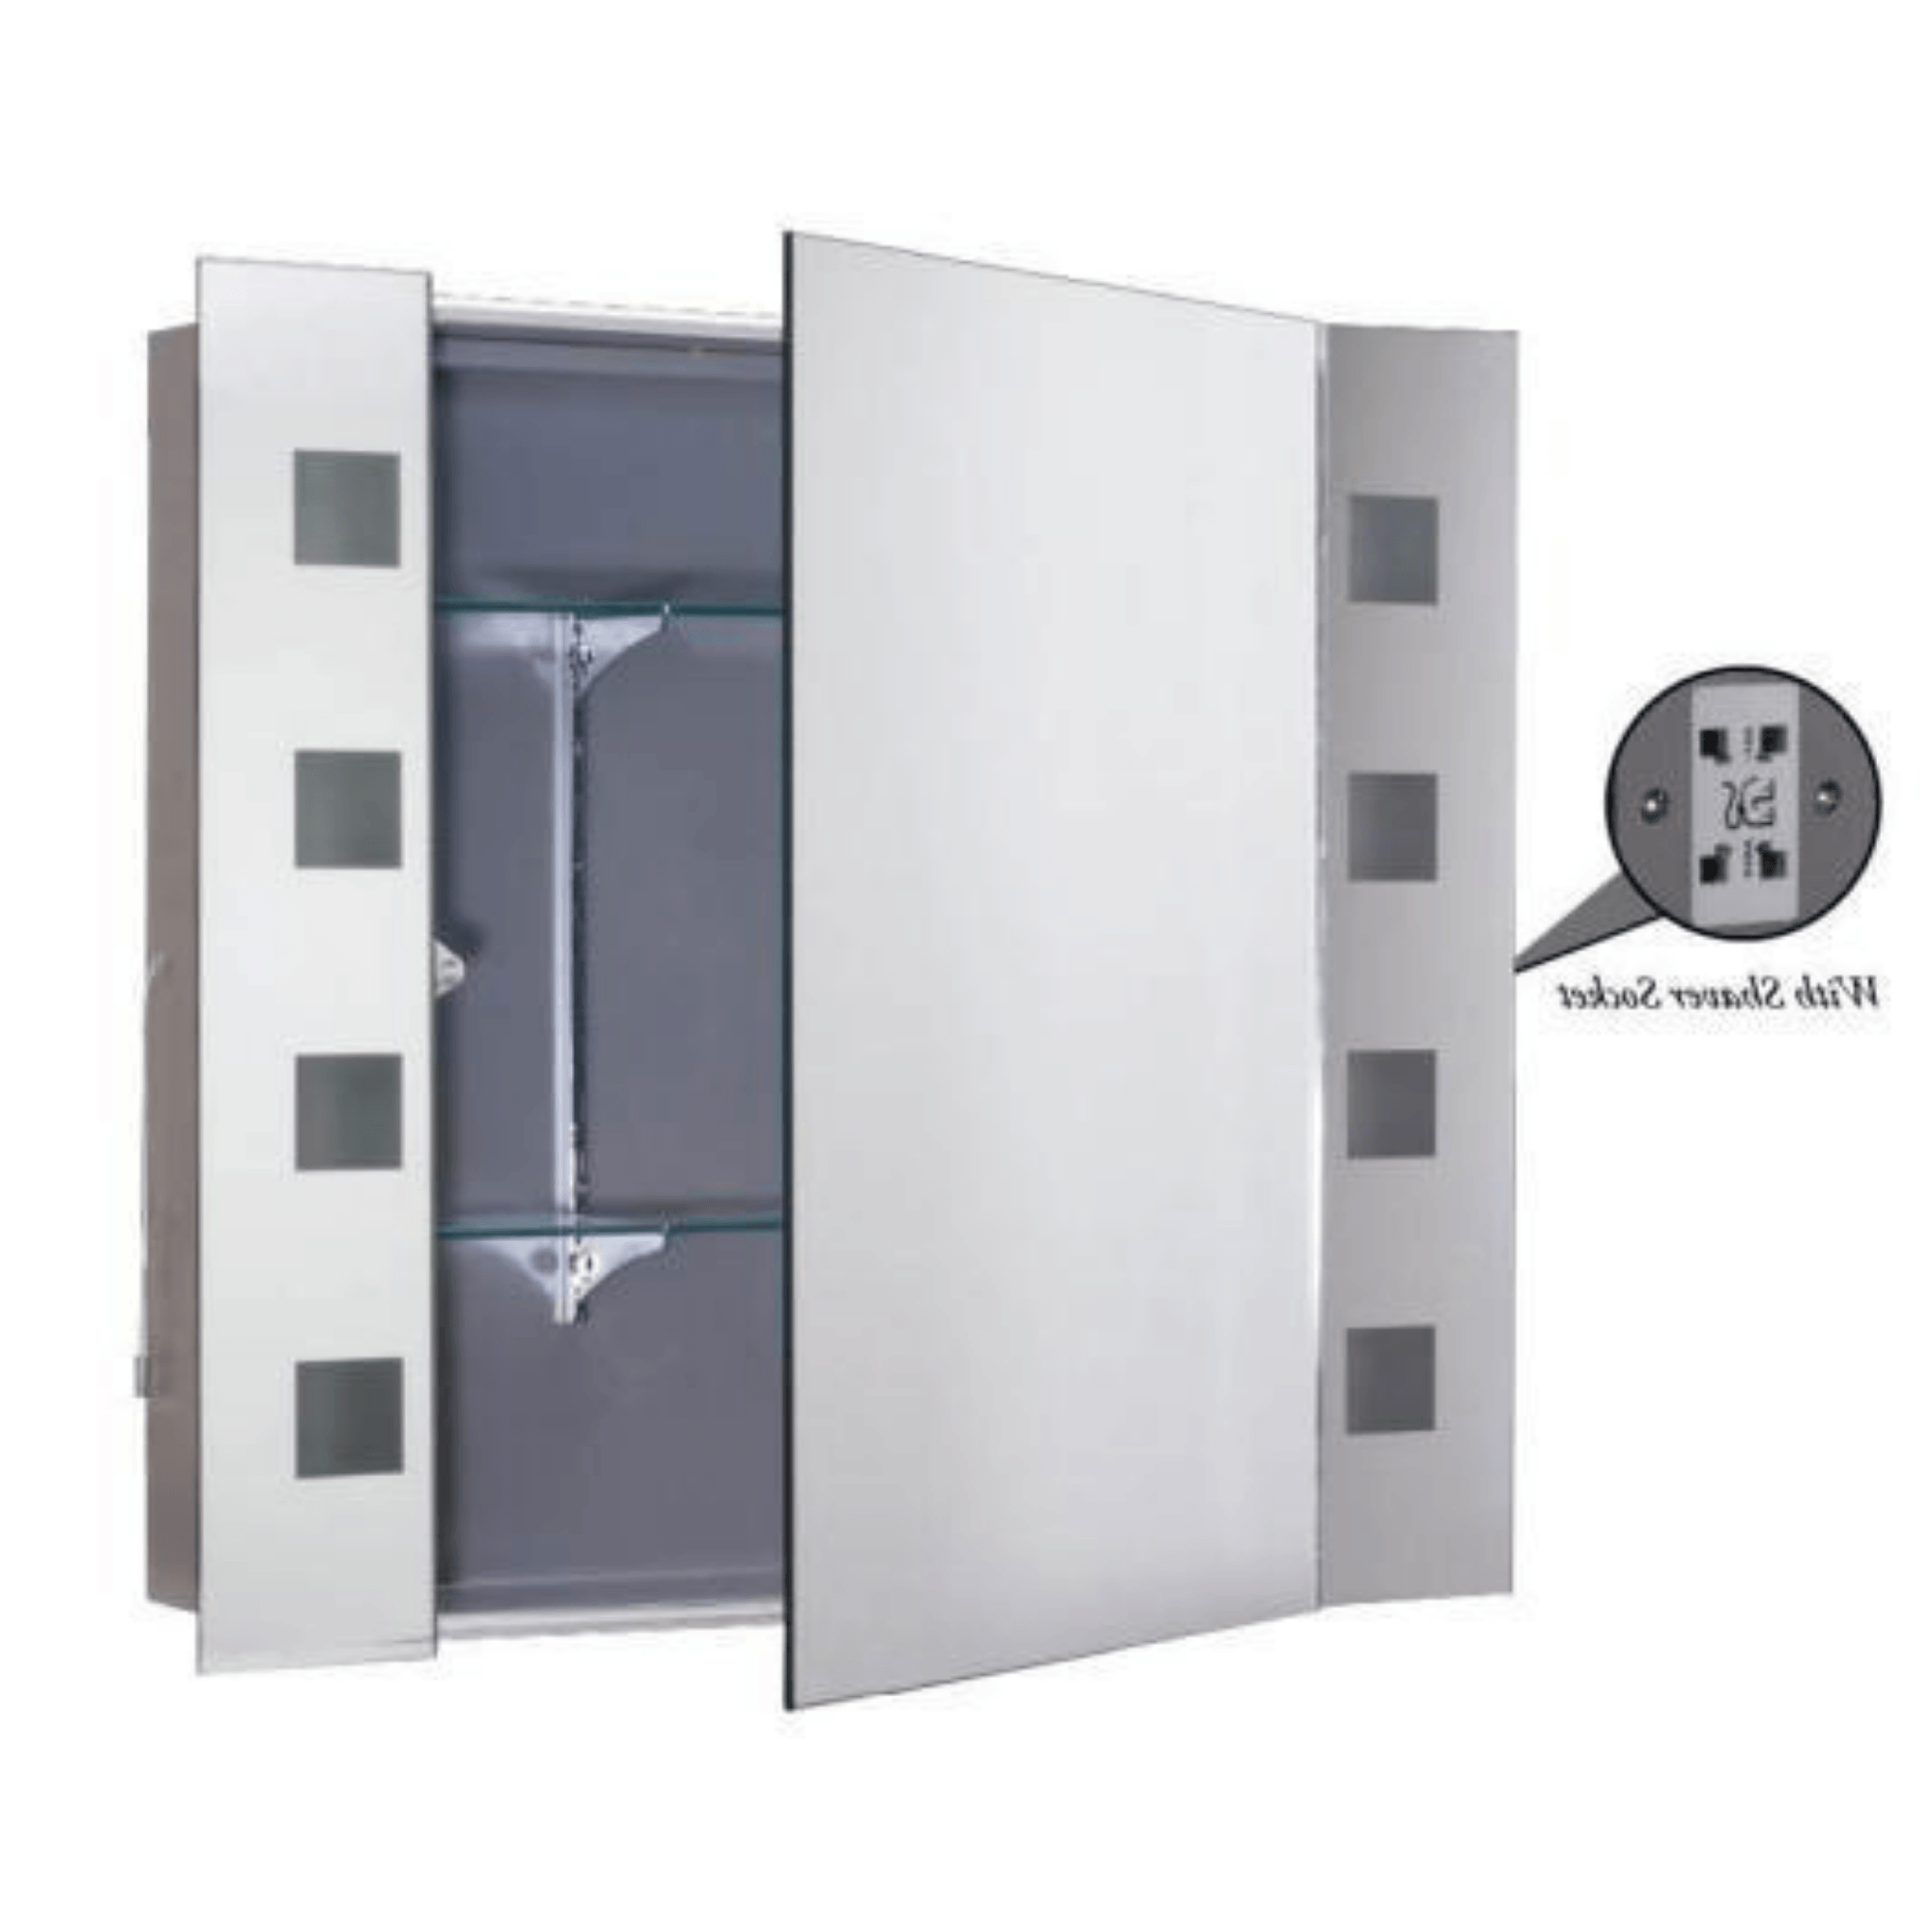 MIR7400 | MIRROR CABINET WITH LIGHTS & SHAVER SOCKETT | IP44 RATED - Cusack Lighting